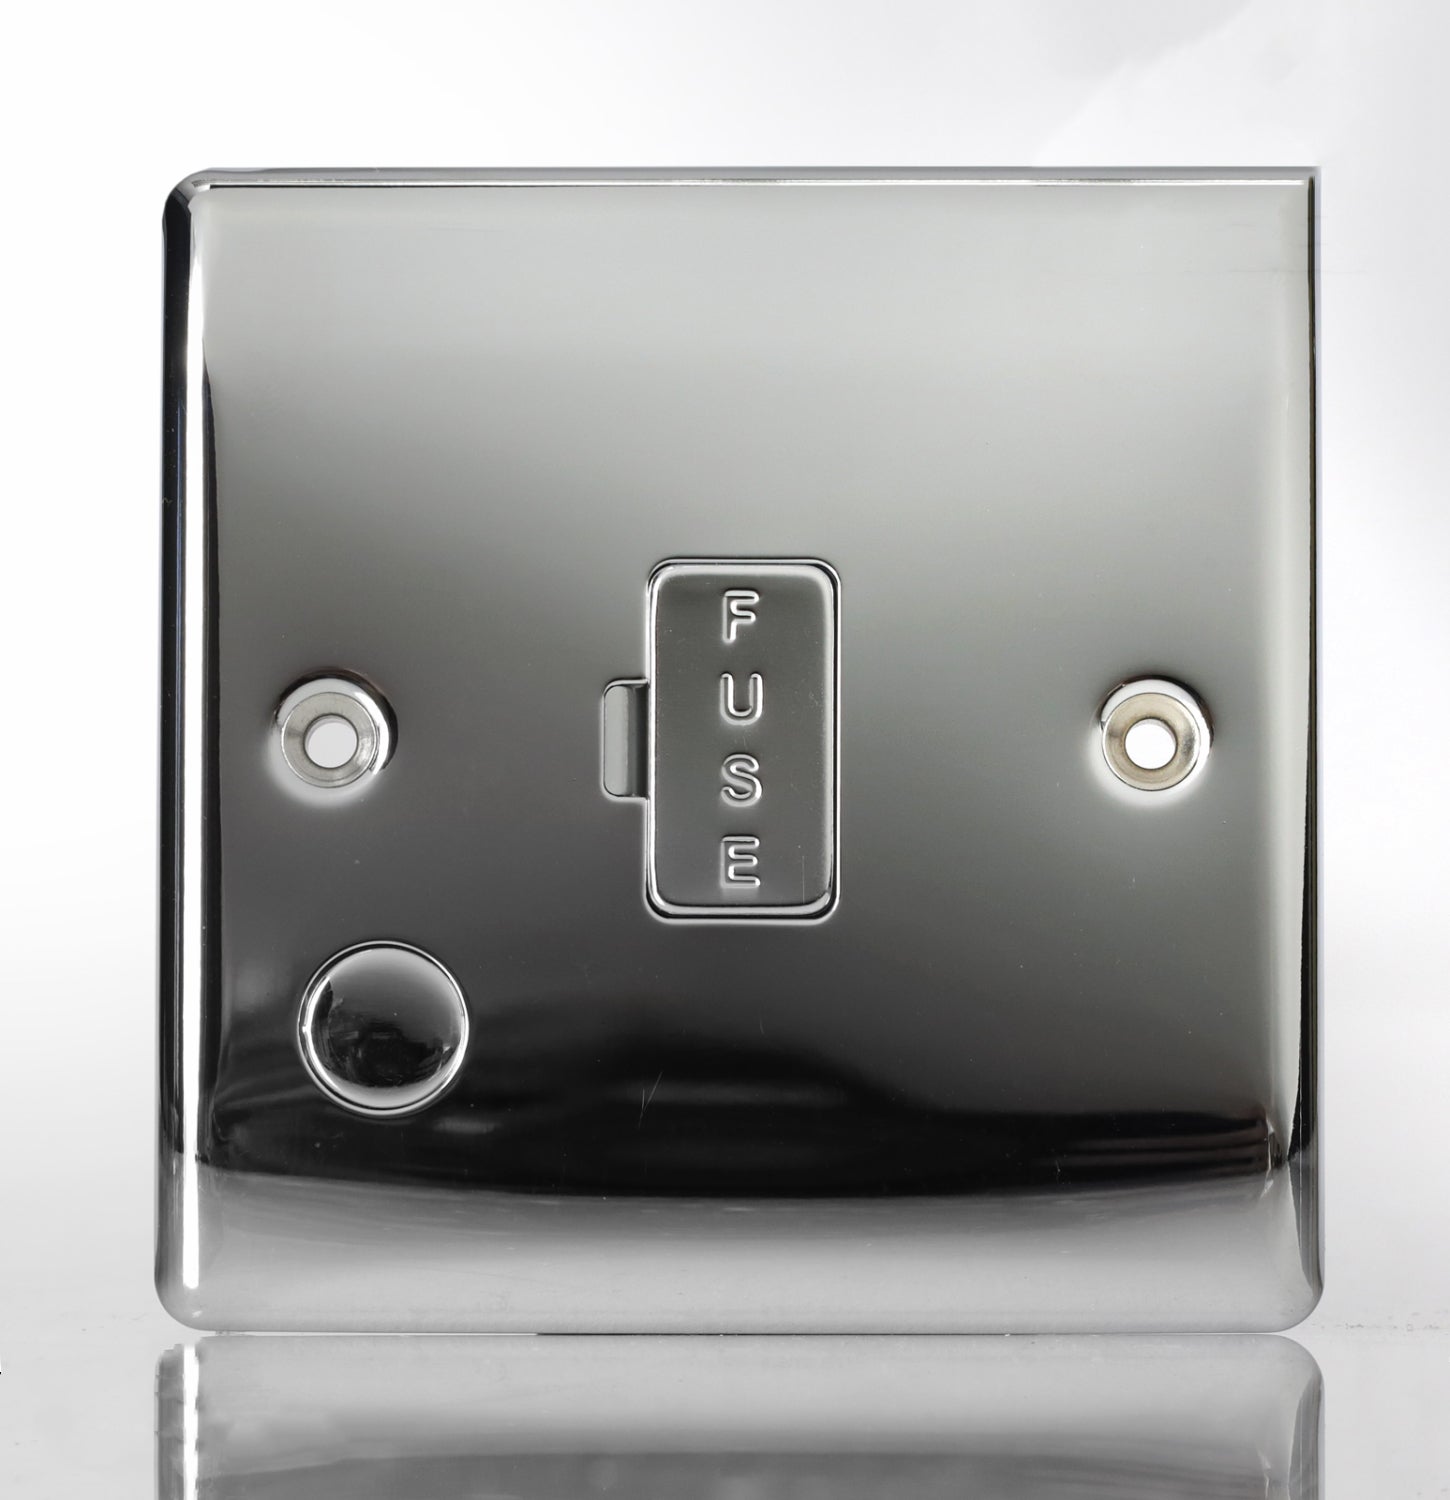 BG Nexus Metal Unswitched Fused Connection Unit with Cable Outlet - Polished Chrome